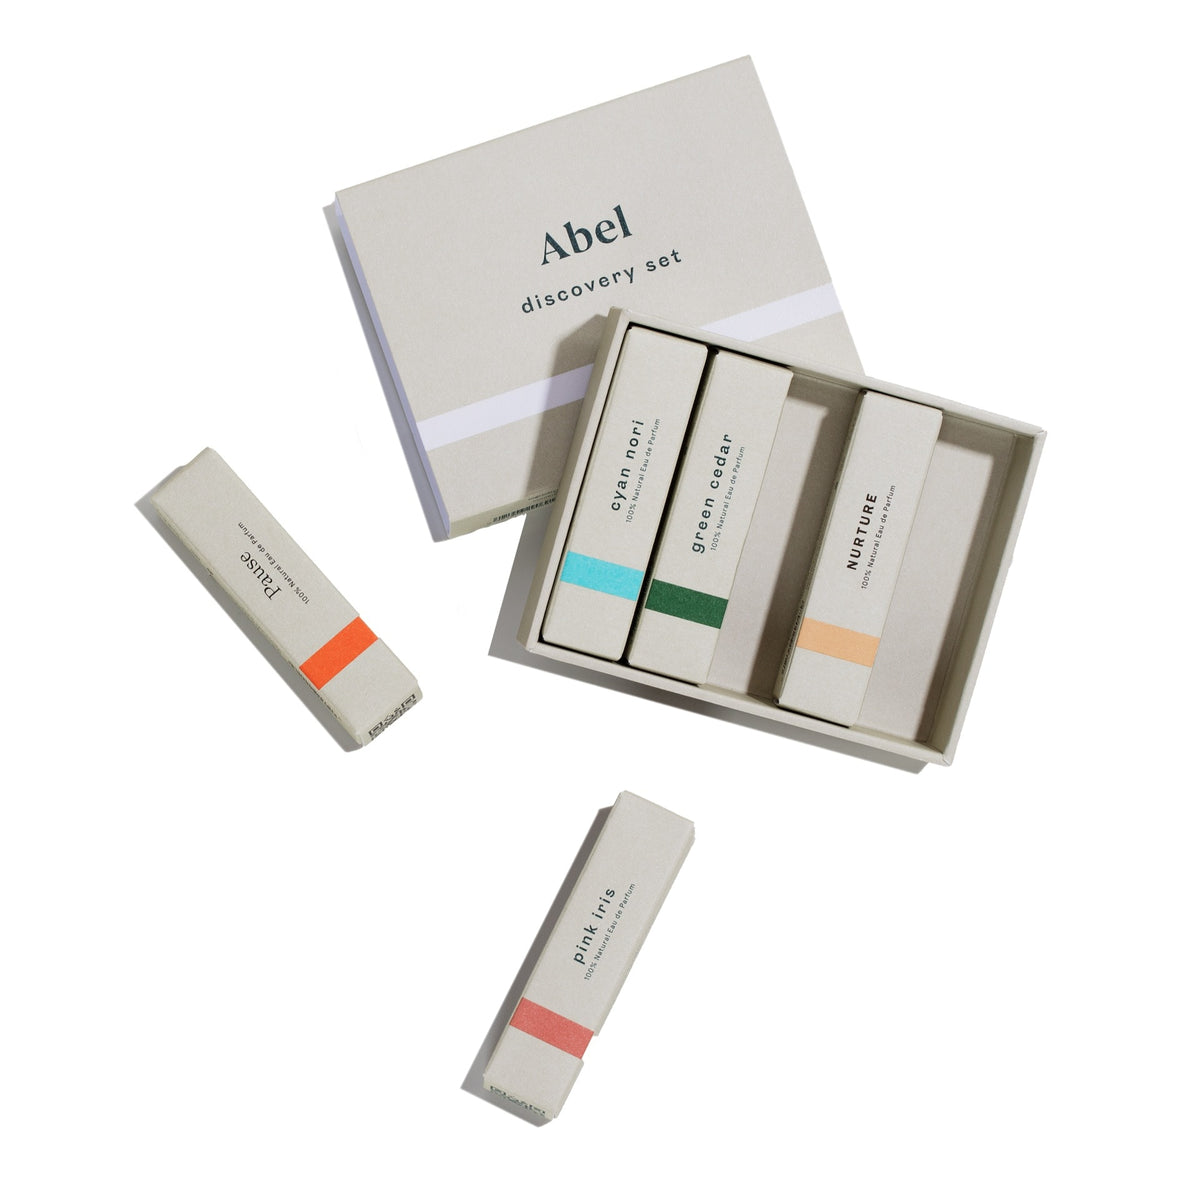 A presentation box filled with the Abel Discovery Set - 5 most popular scents, including fragrance options.